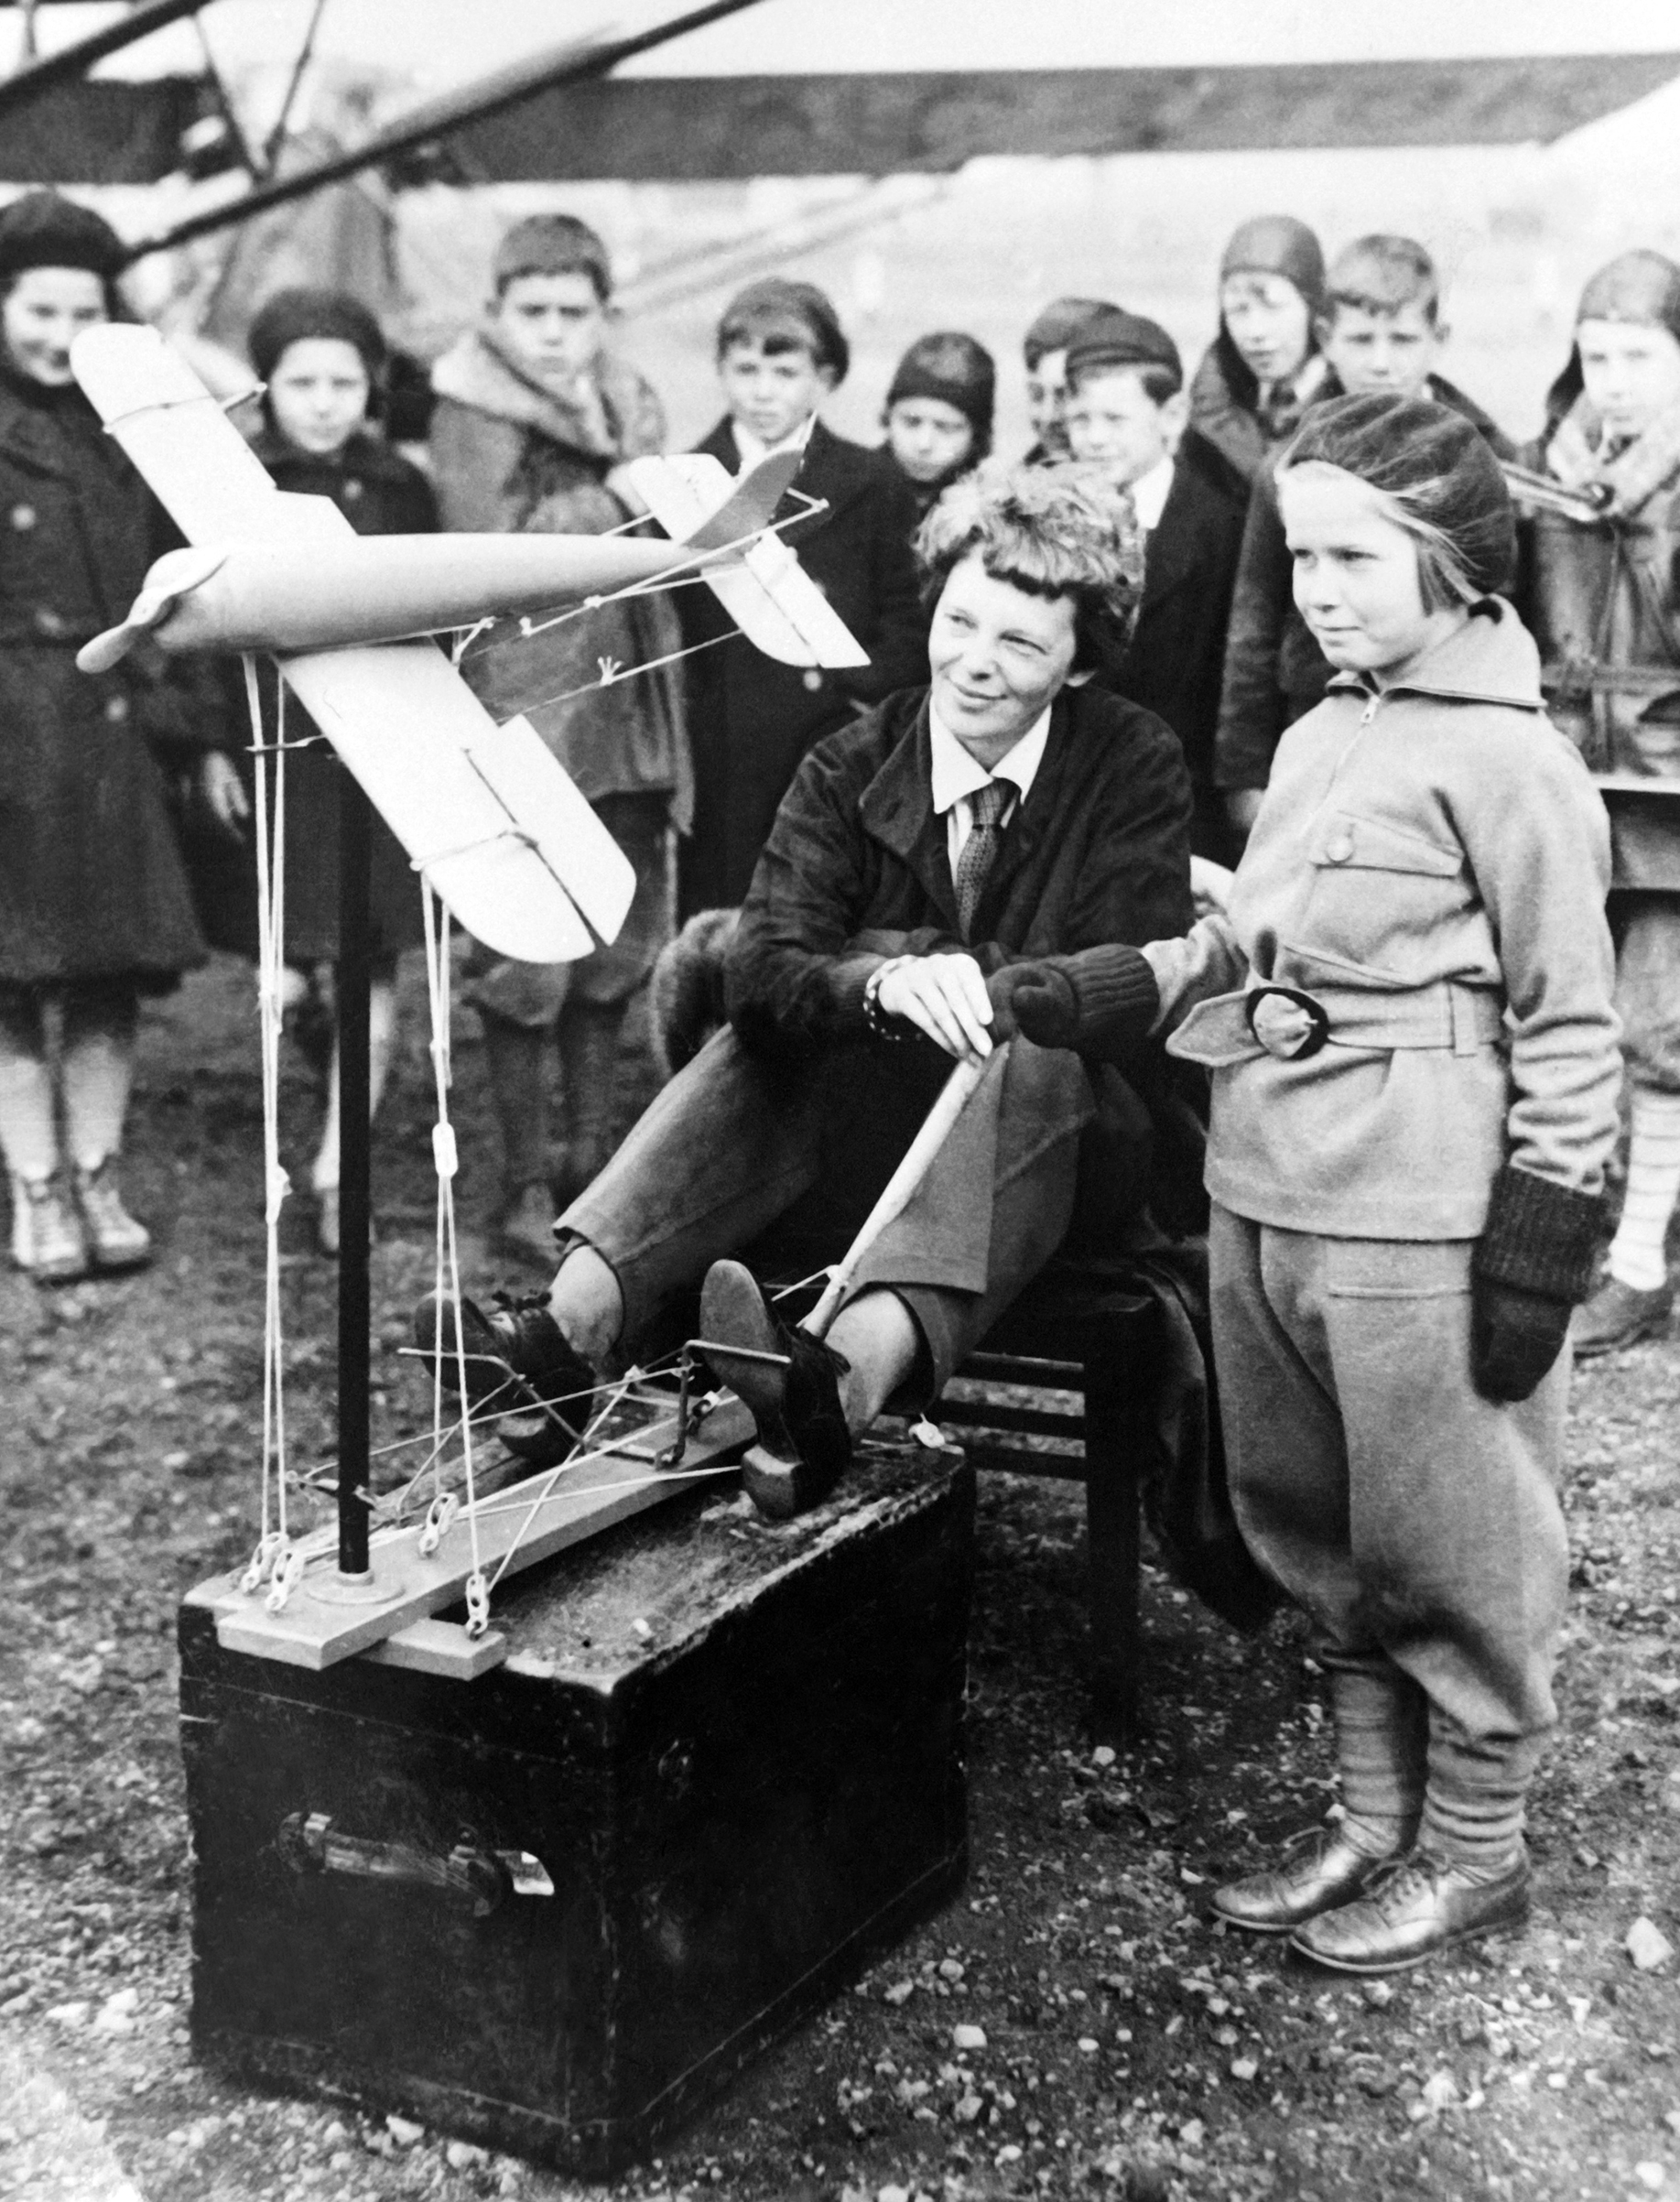 Amelia Earhart explains to children with a reduced model, the operation of the catapult to launch an aircraft on Nov. 28, 1933.